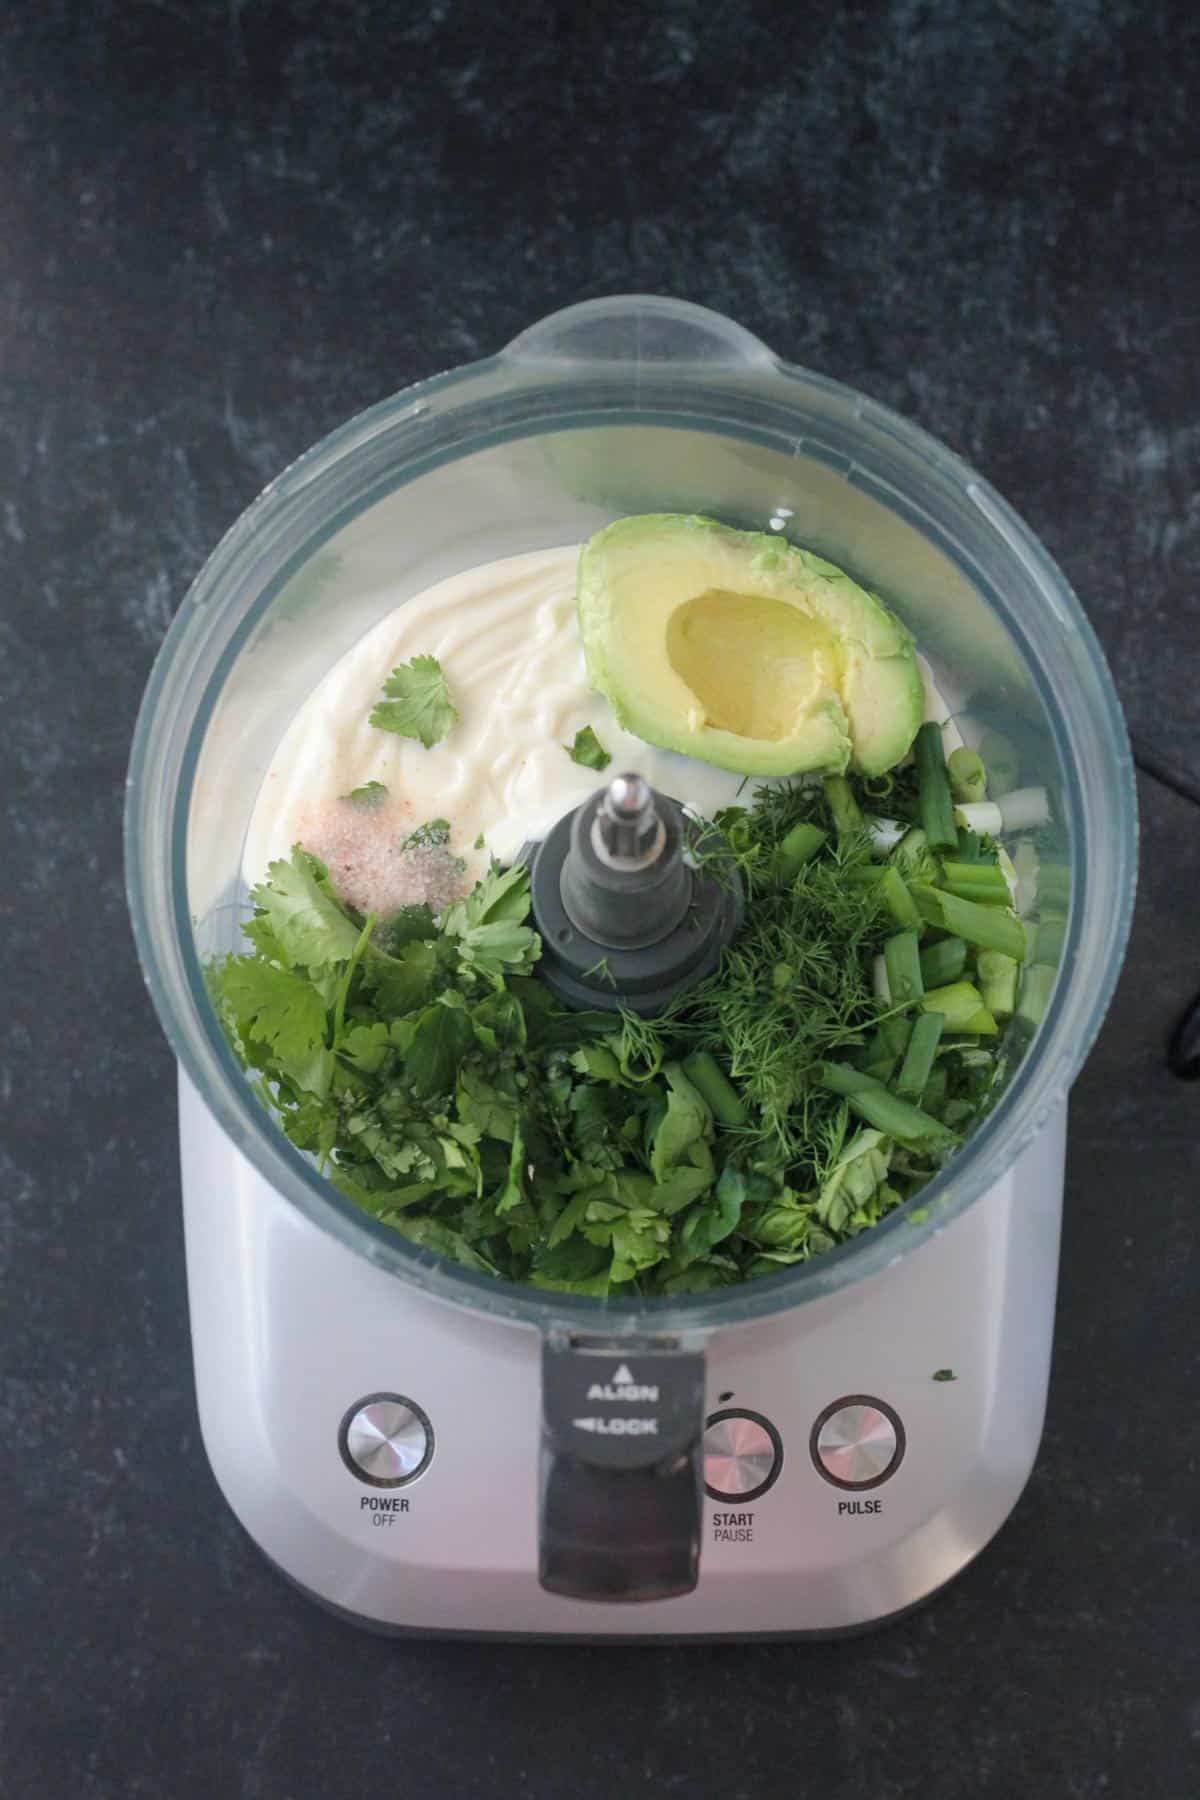 Ingredients in a food processor.